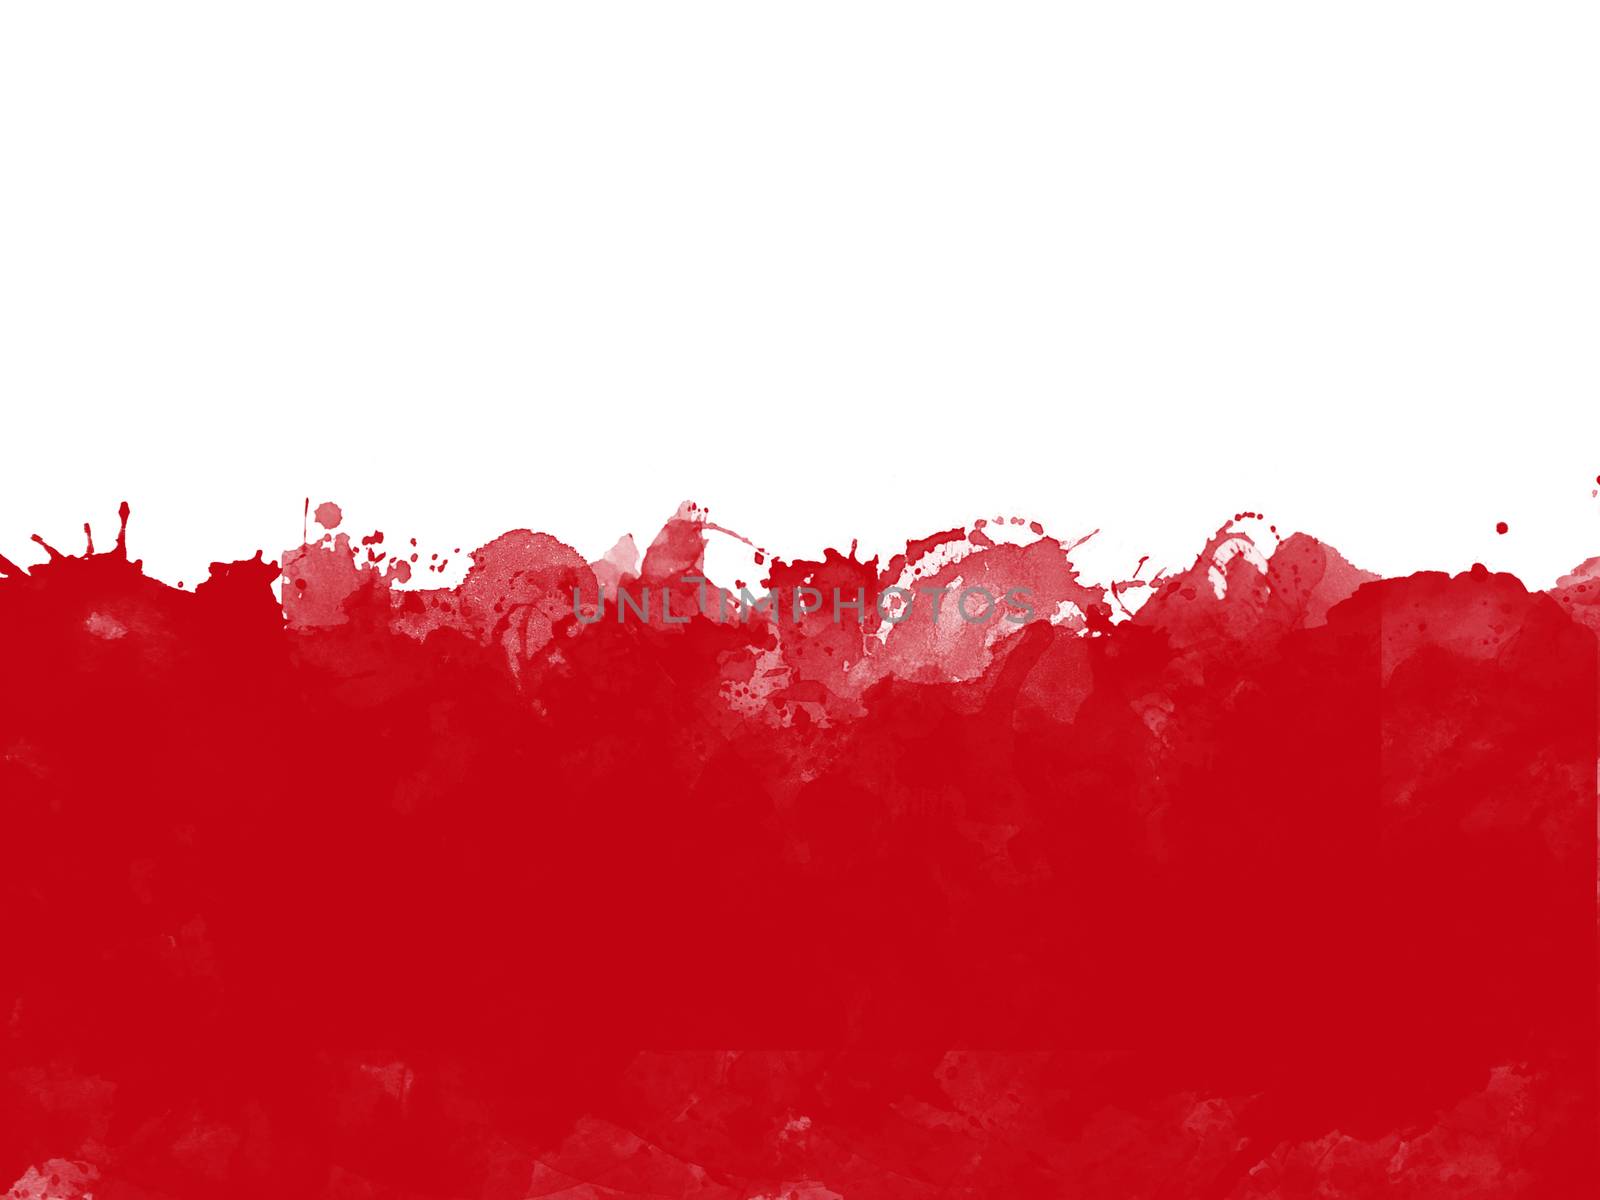 Flag of Poland by watercolor paint brush, grunge style by asiandelight